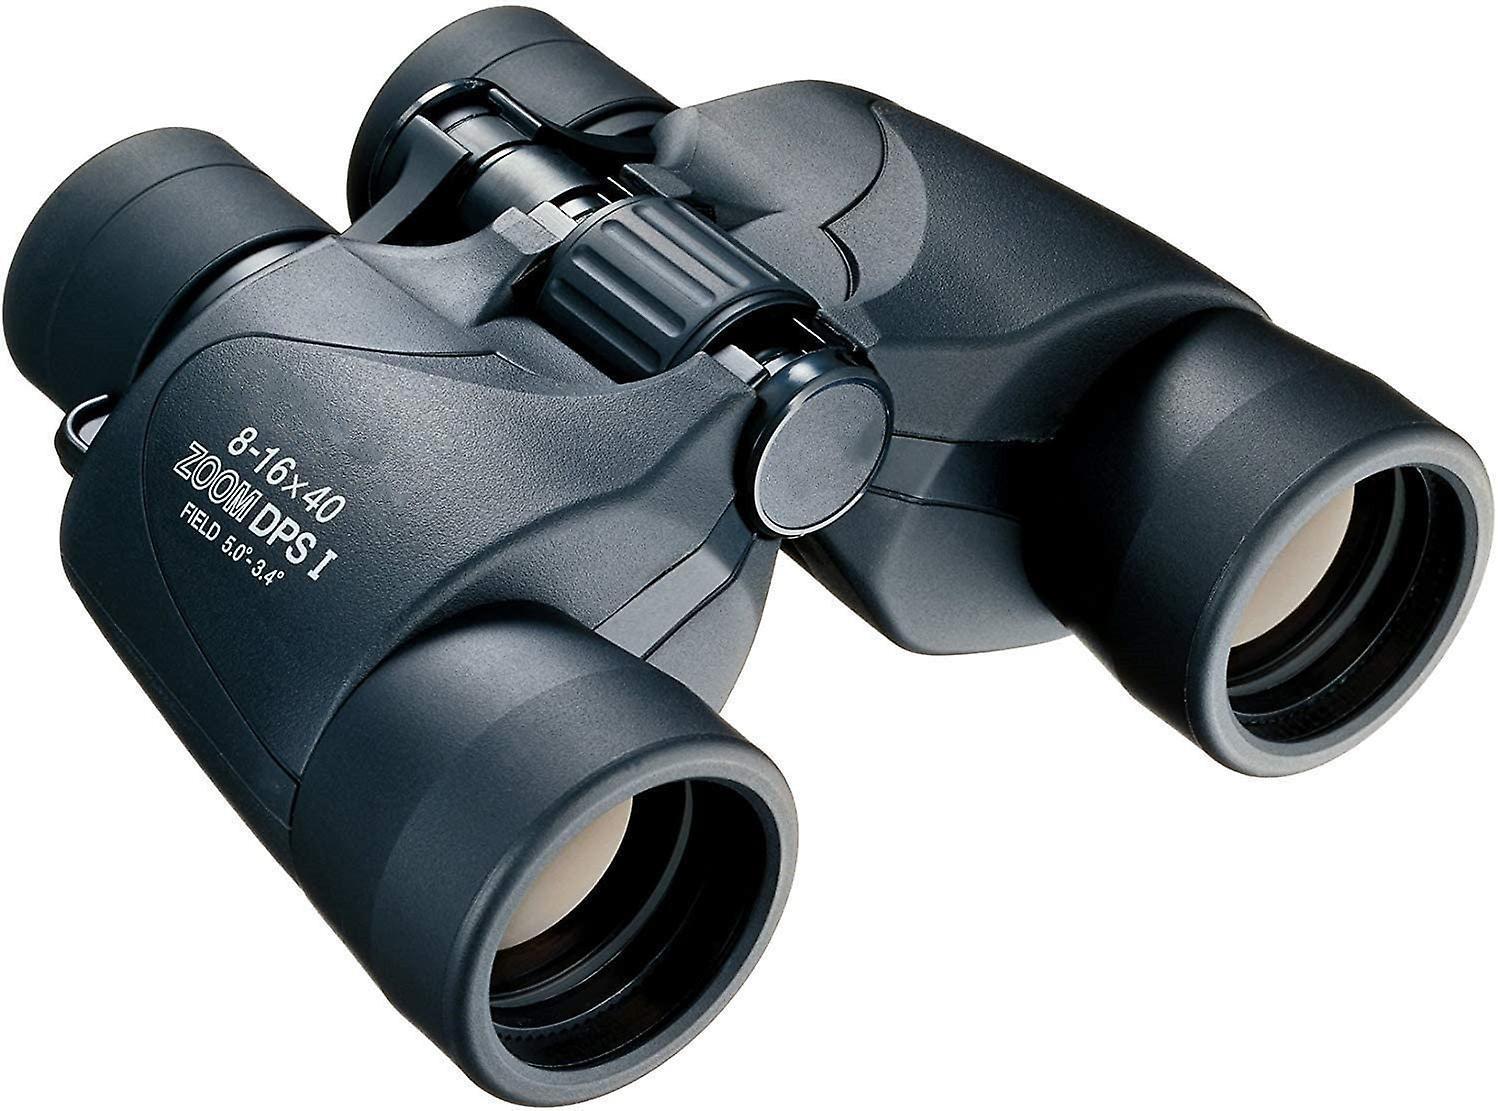 Olympus binoculars 8-16x40 S with shoulder strap, bag and 15 year manufacturer's guarantee. Clear images, natural colors, wide field of view, lightweight - ideal for nature observation, sports and concerts,（black）